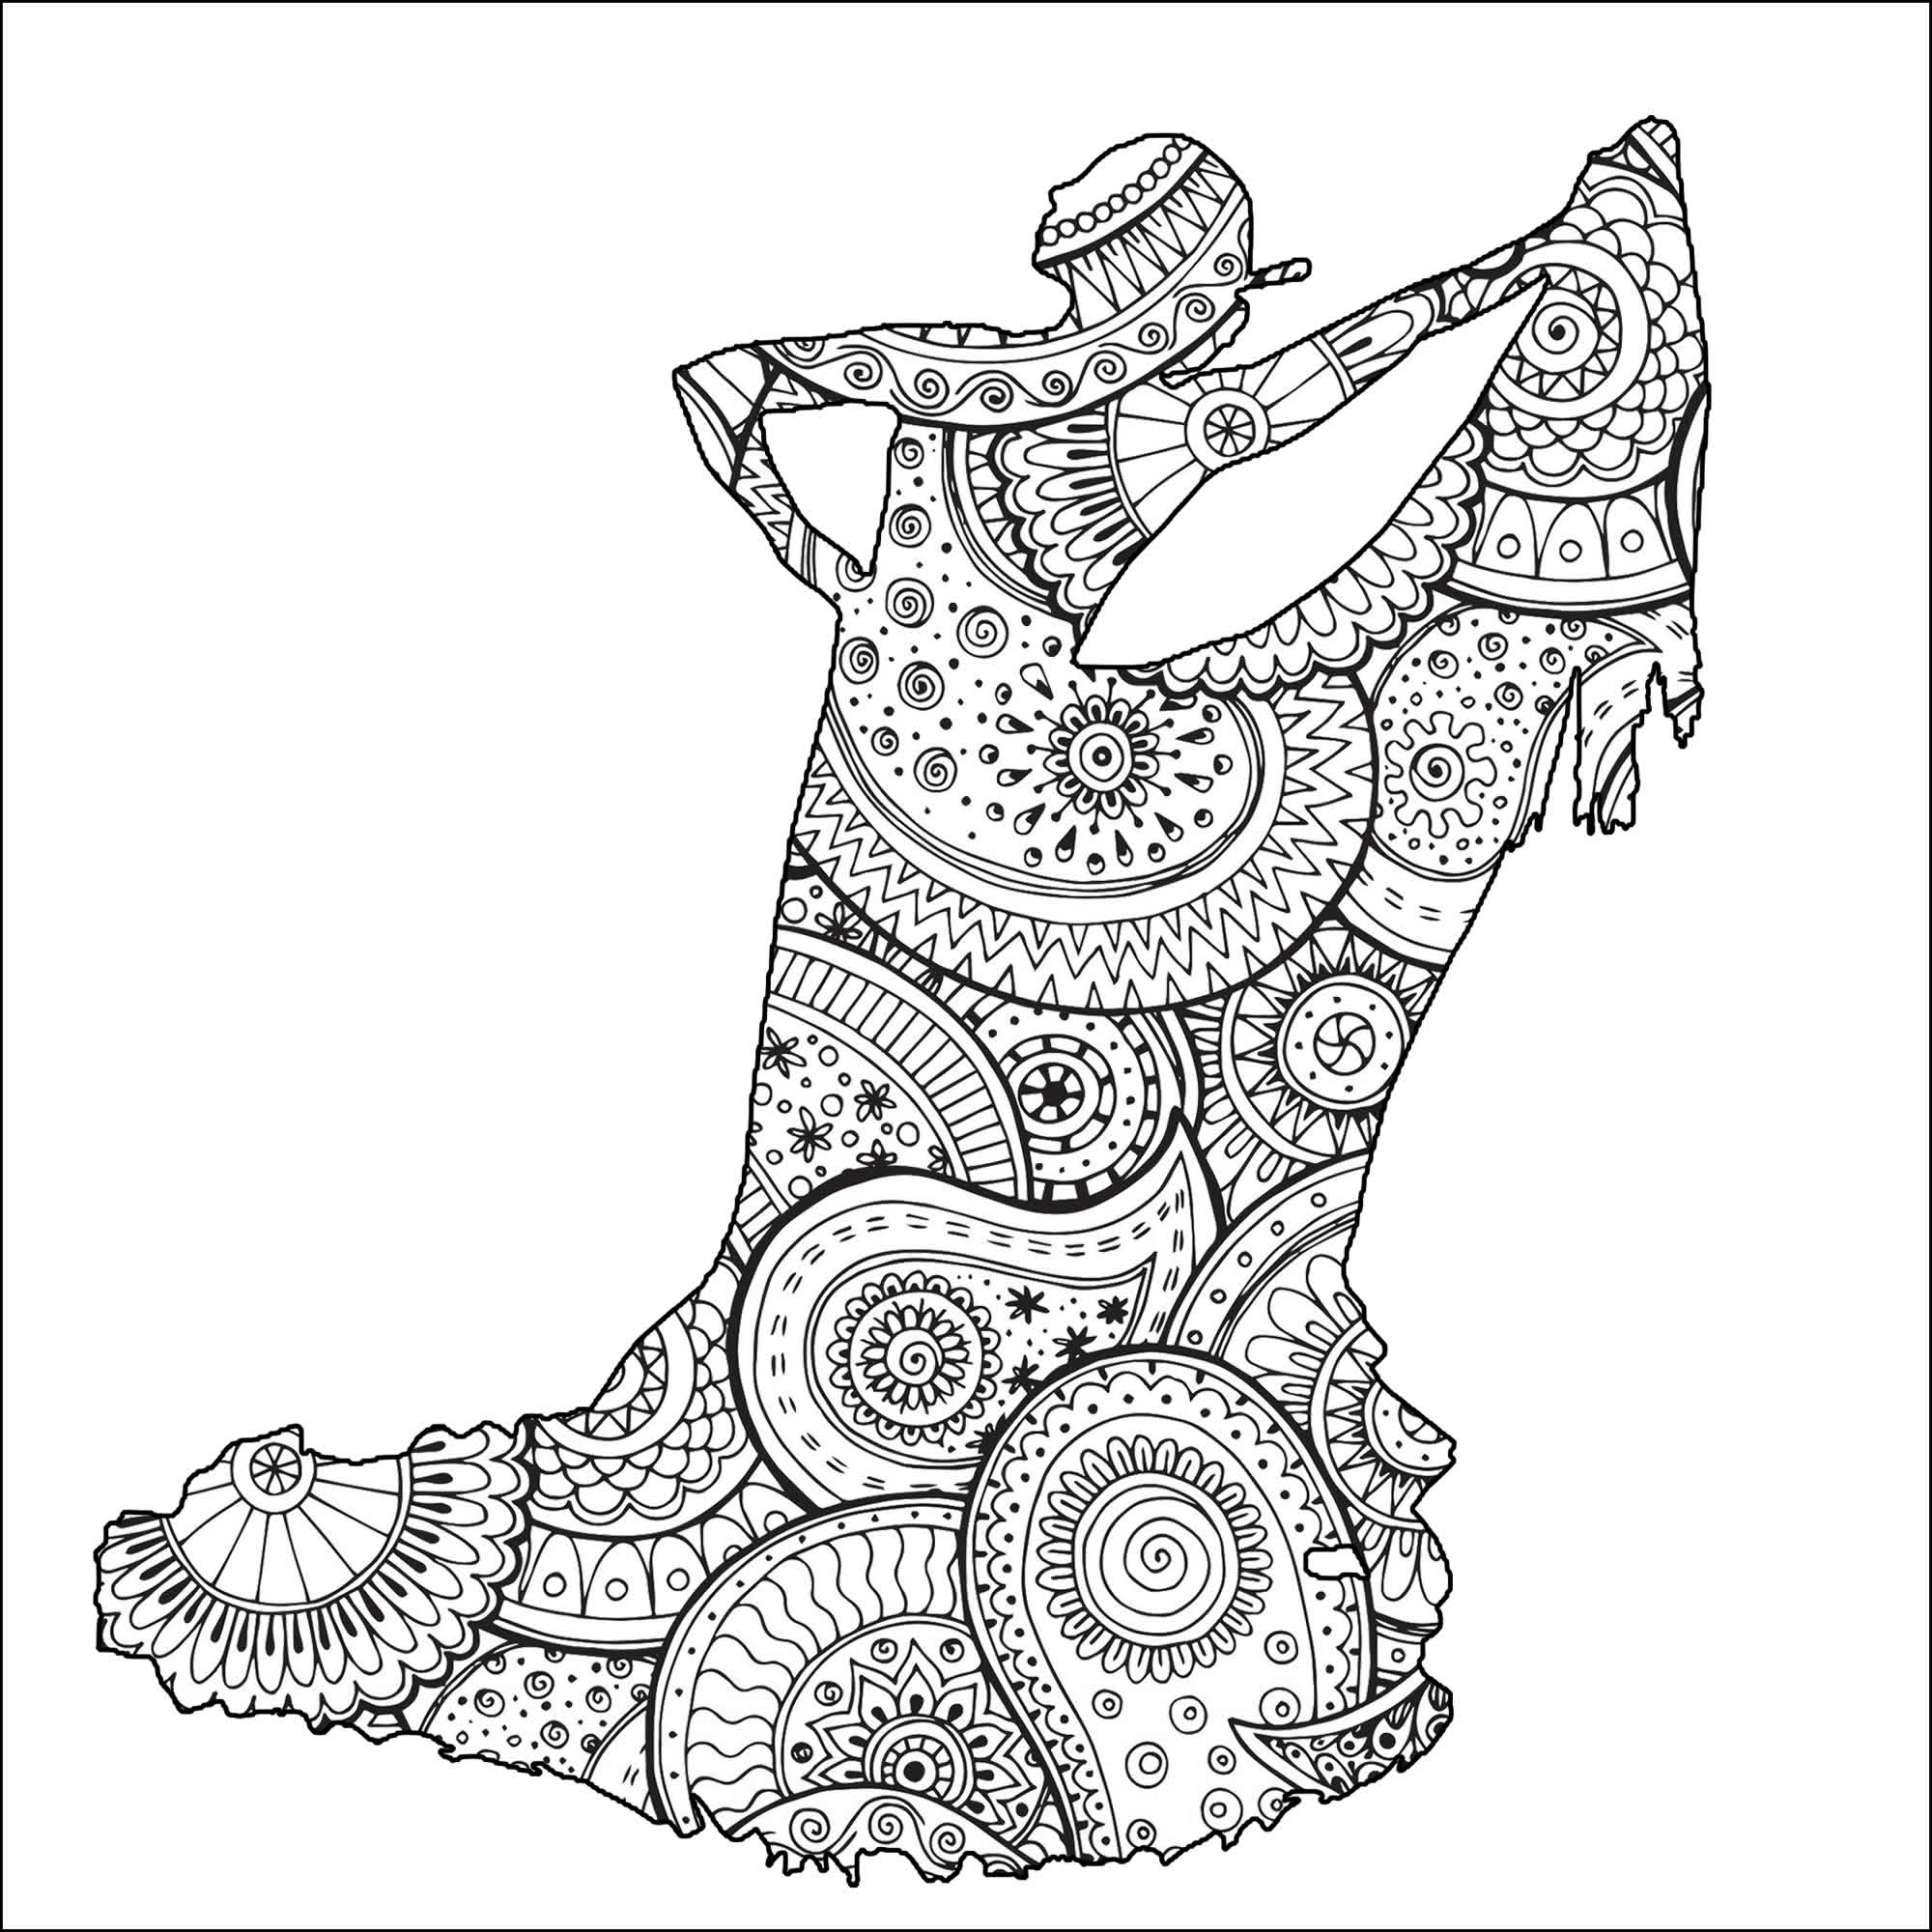 Beautiful female flamenco dancer shape with Zentangle and paisley patterns